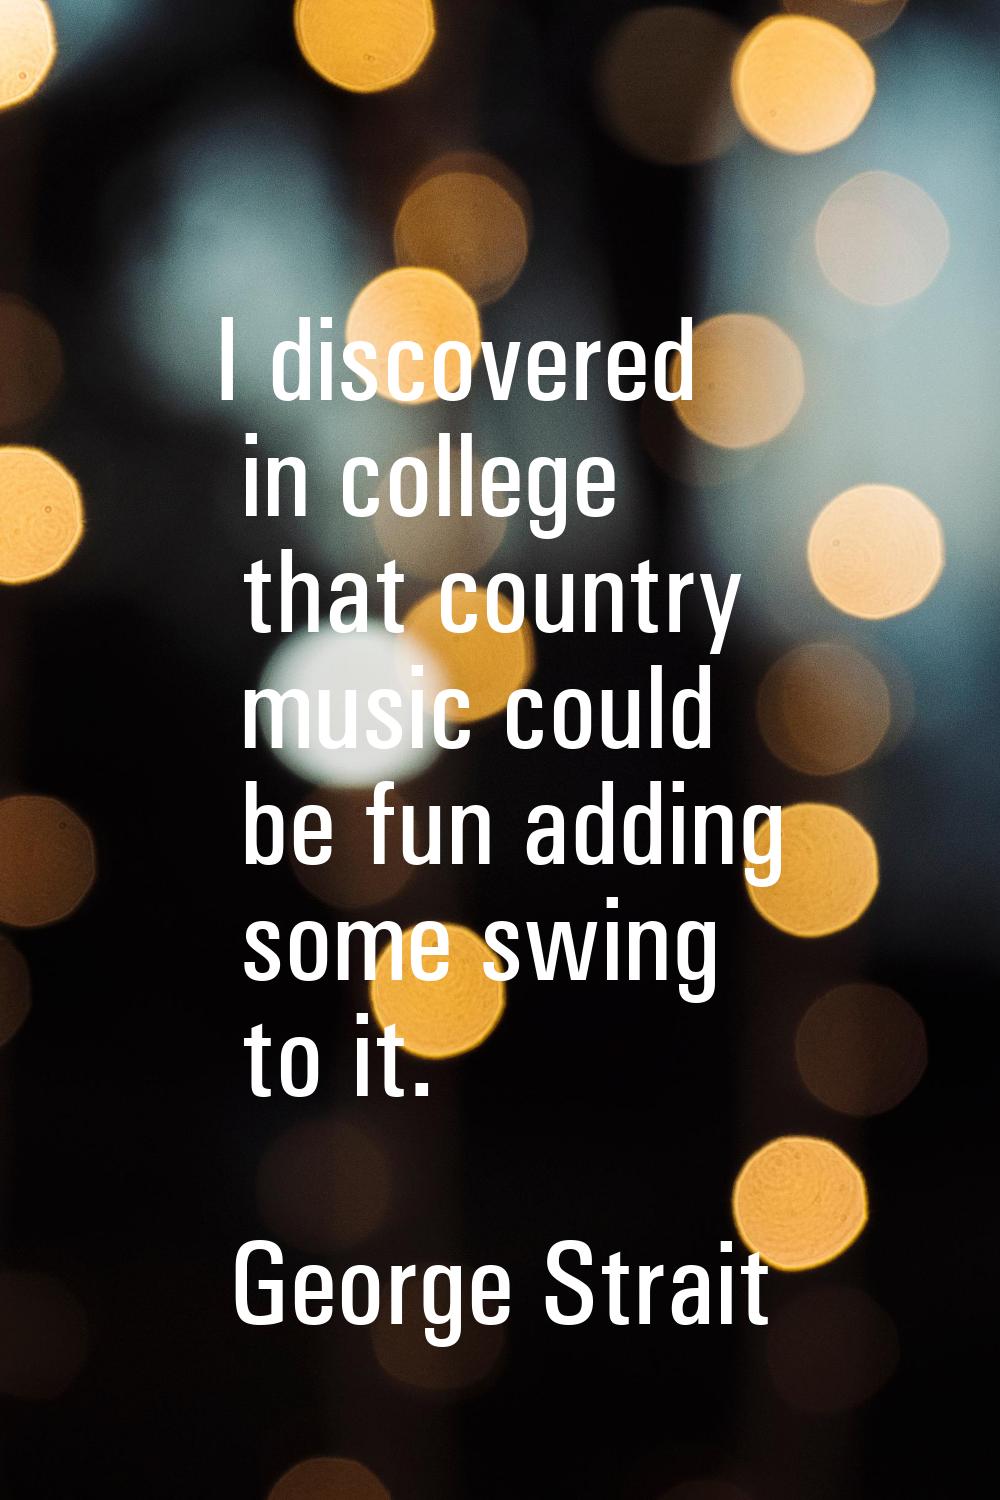 I discovered in college that country music could be fun adding some swing to it.